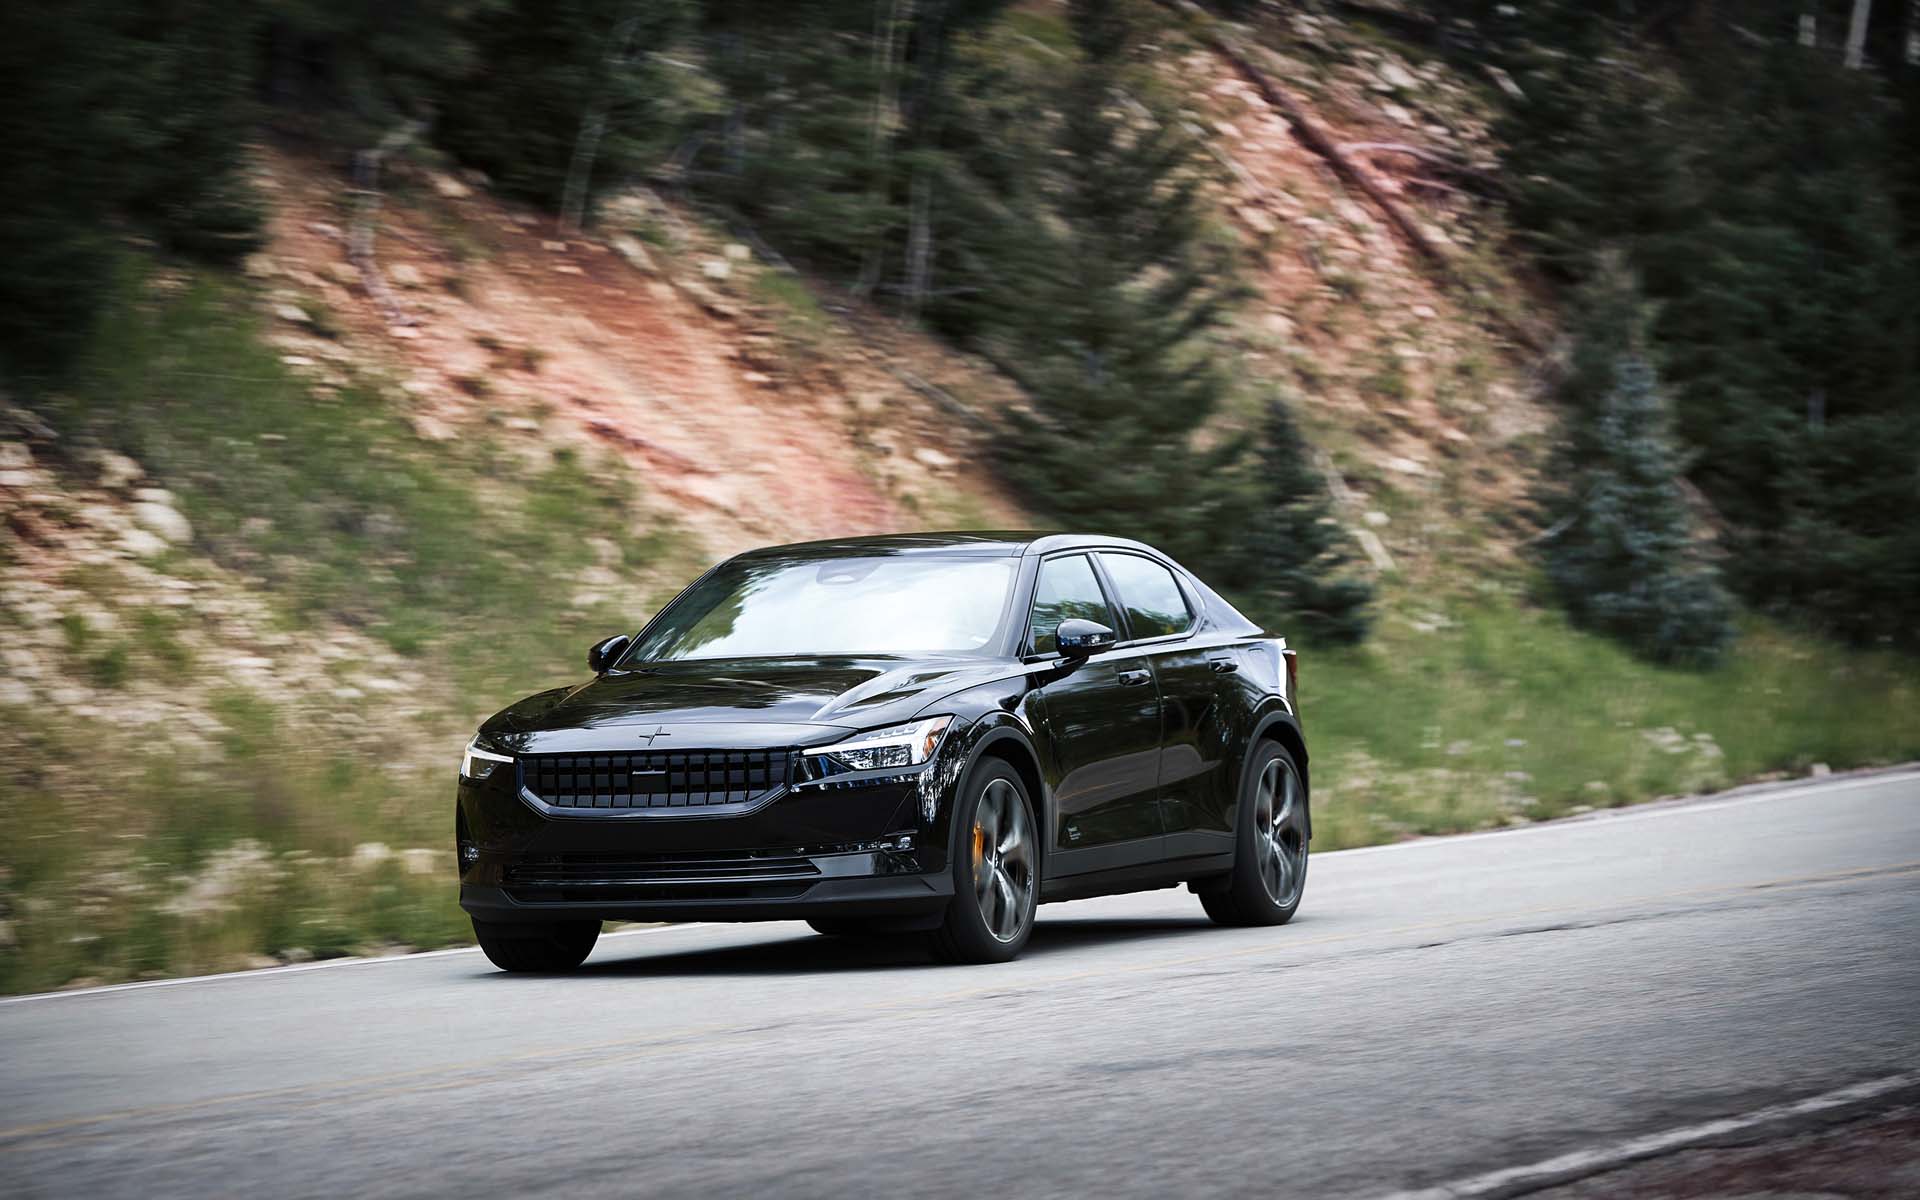 First drive review: 2022 Polestar 2 dual-motor revisits the value equationFirst drive review: 2022 Polestar 2 dual-motor revisits the value equation